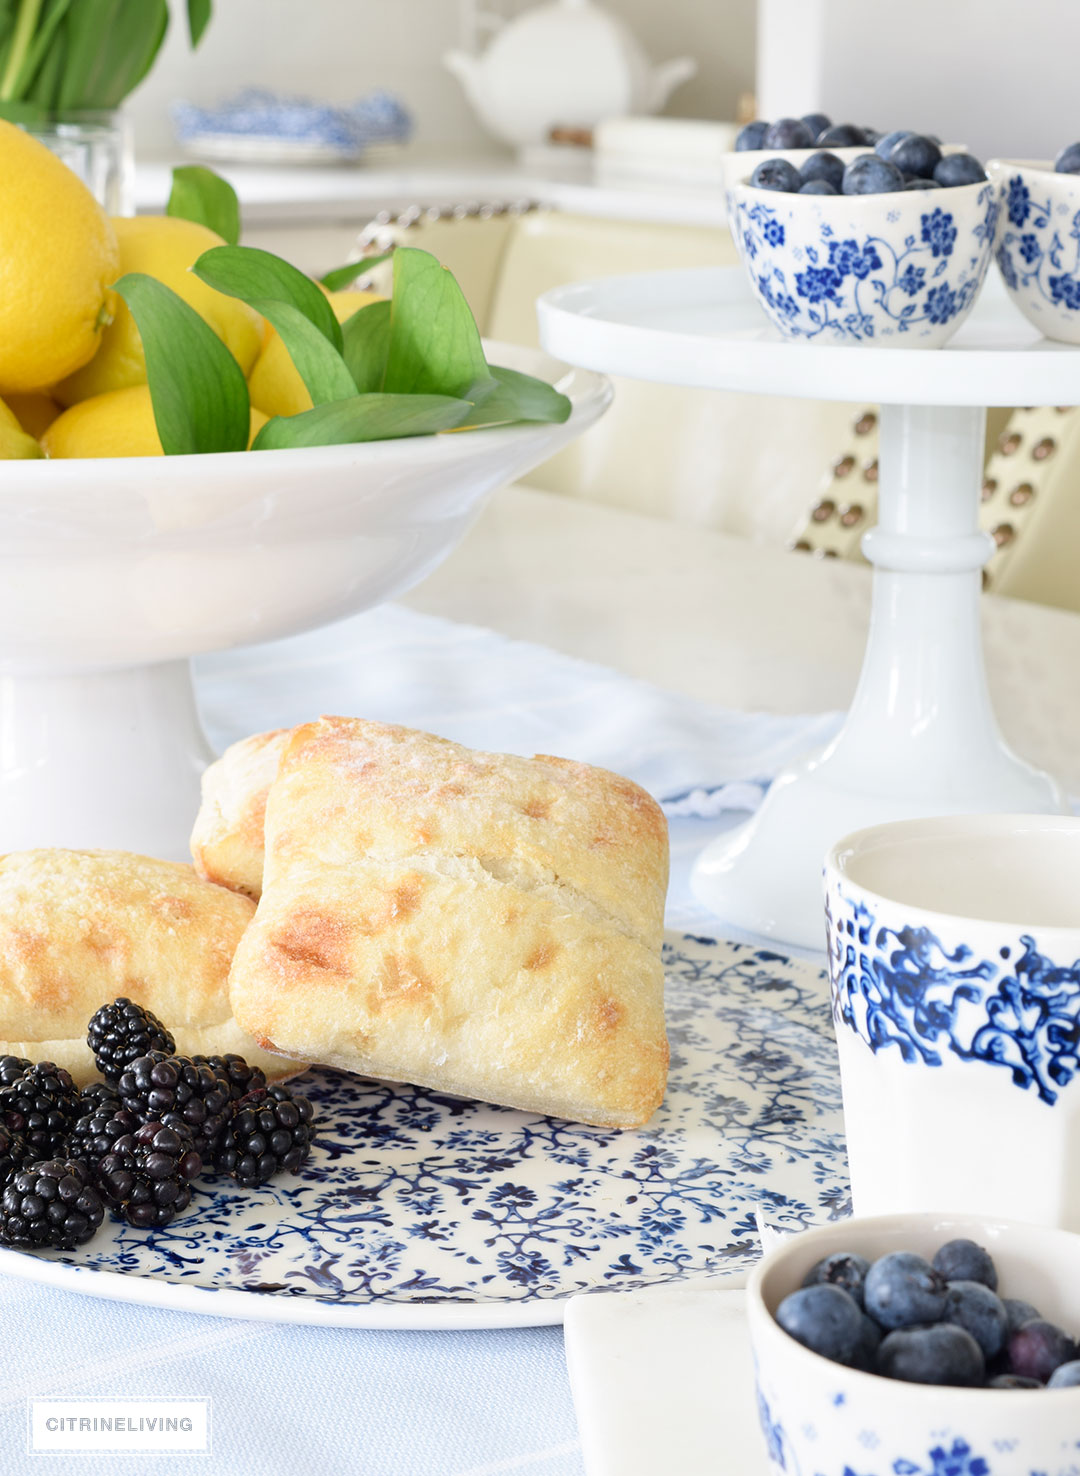 Create a welcoming tablescape of blue and white accented with fresh lemons.